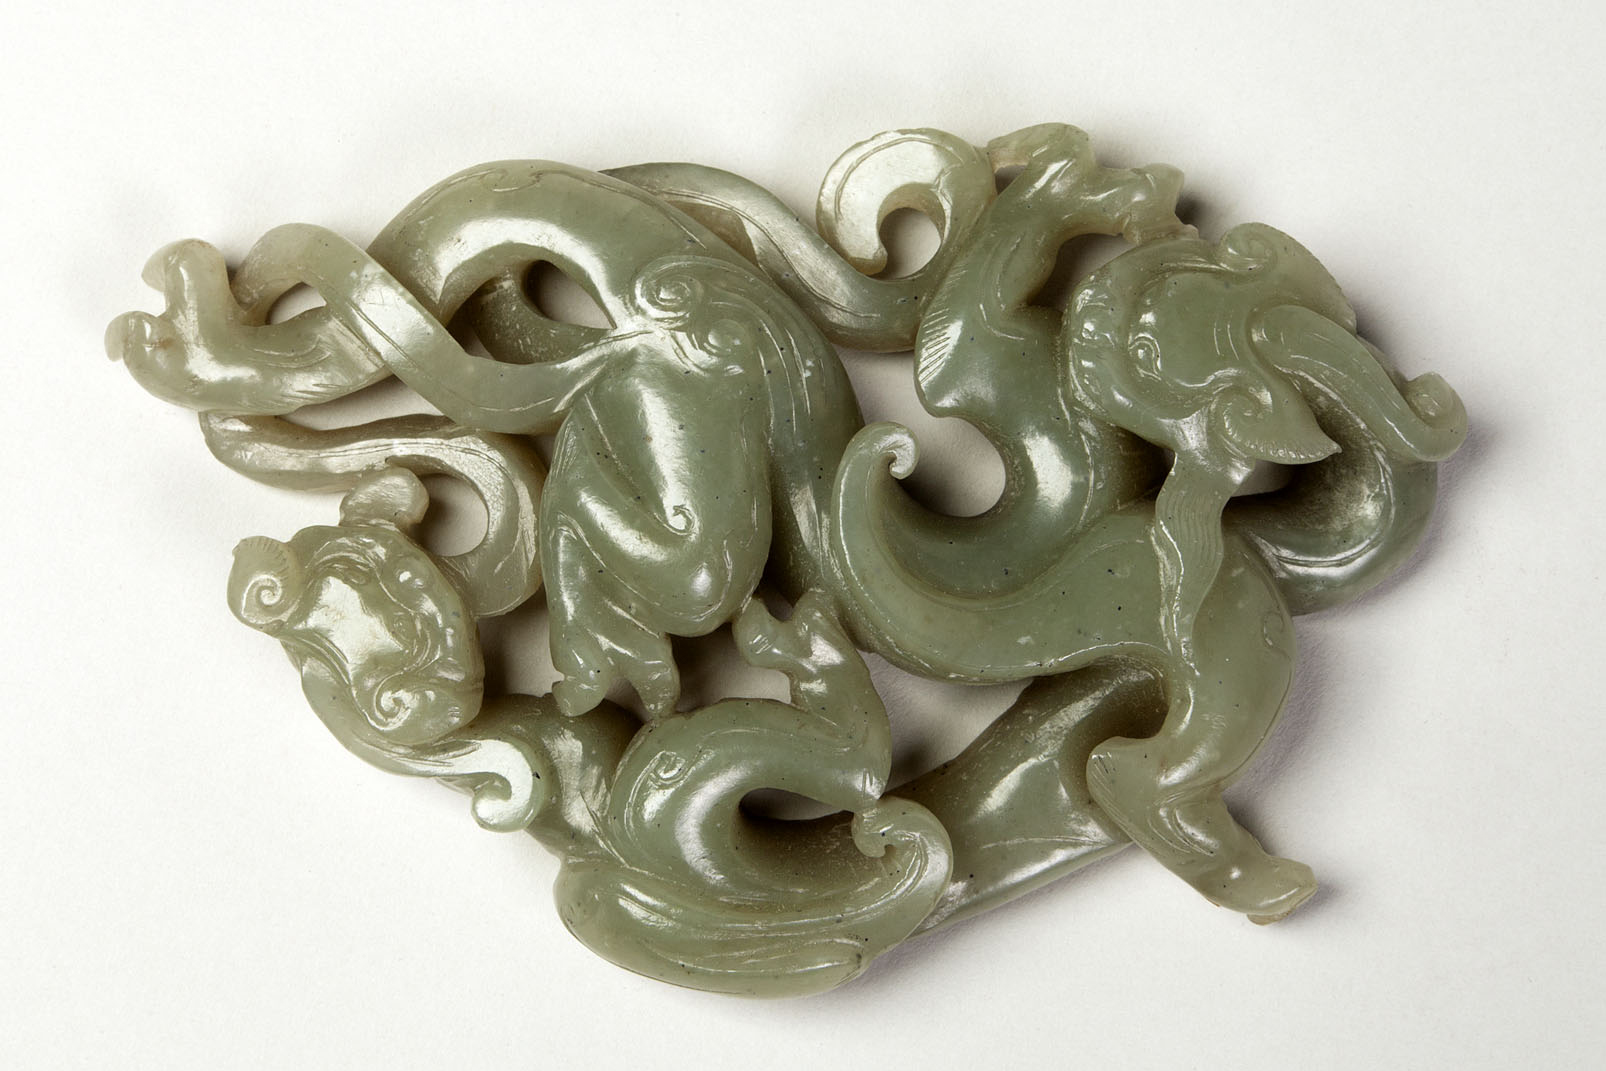 Chinese Jade Clothing Plaque. Ming Dynasty, Wanli Period, 1573-1619. James Cromar Watt bequest, 1941. © Aberdeen City Council (Art Gallery and Museums Collections)